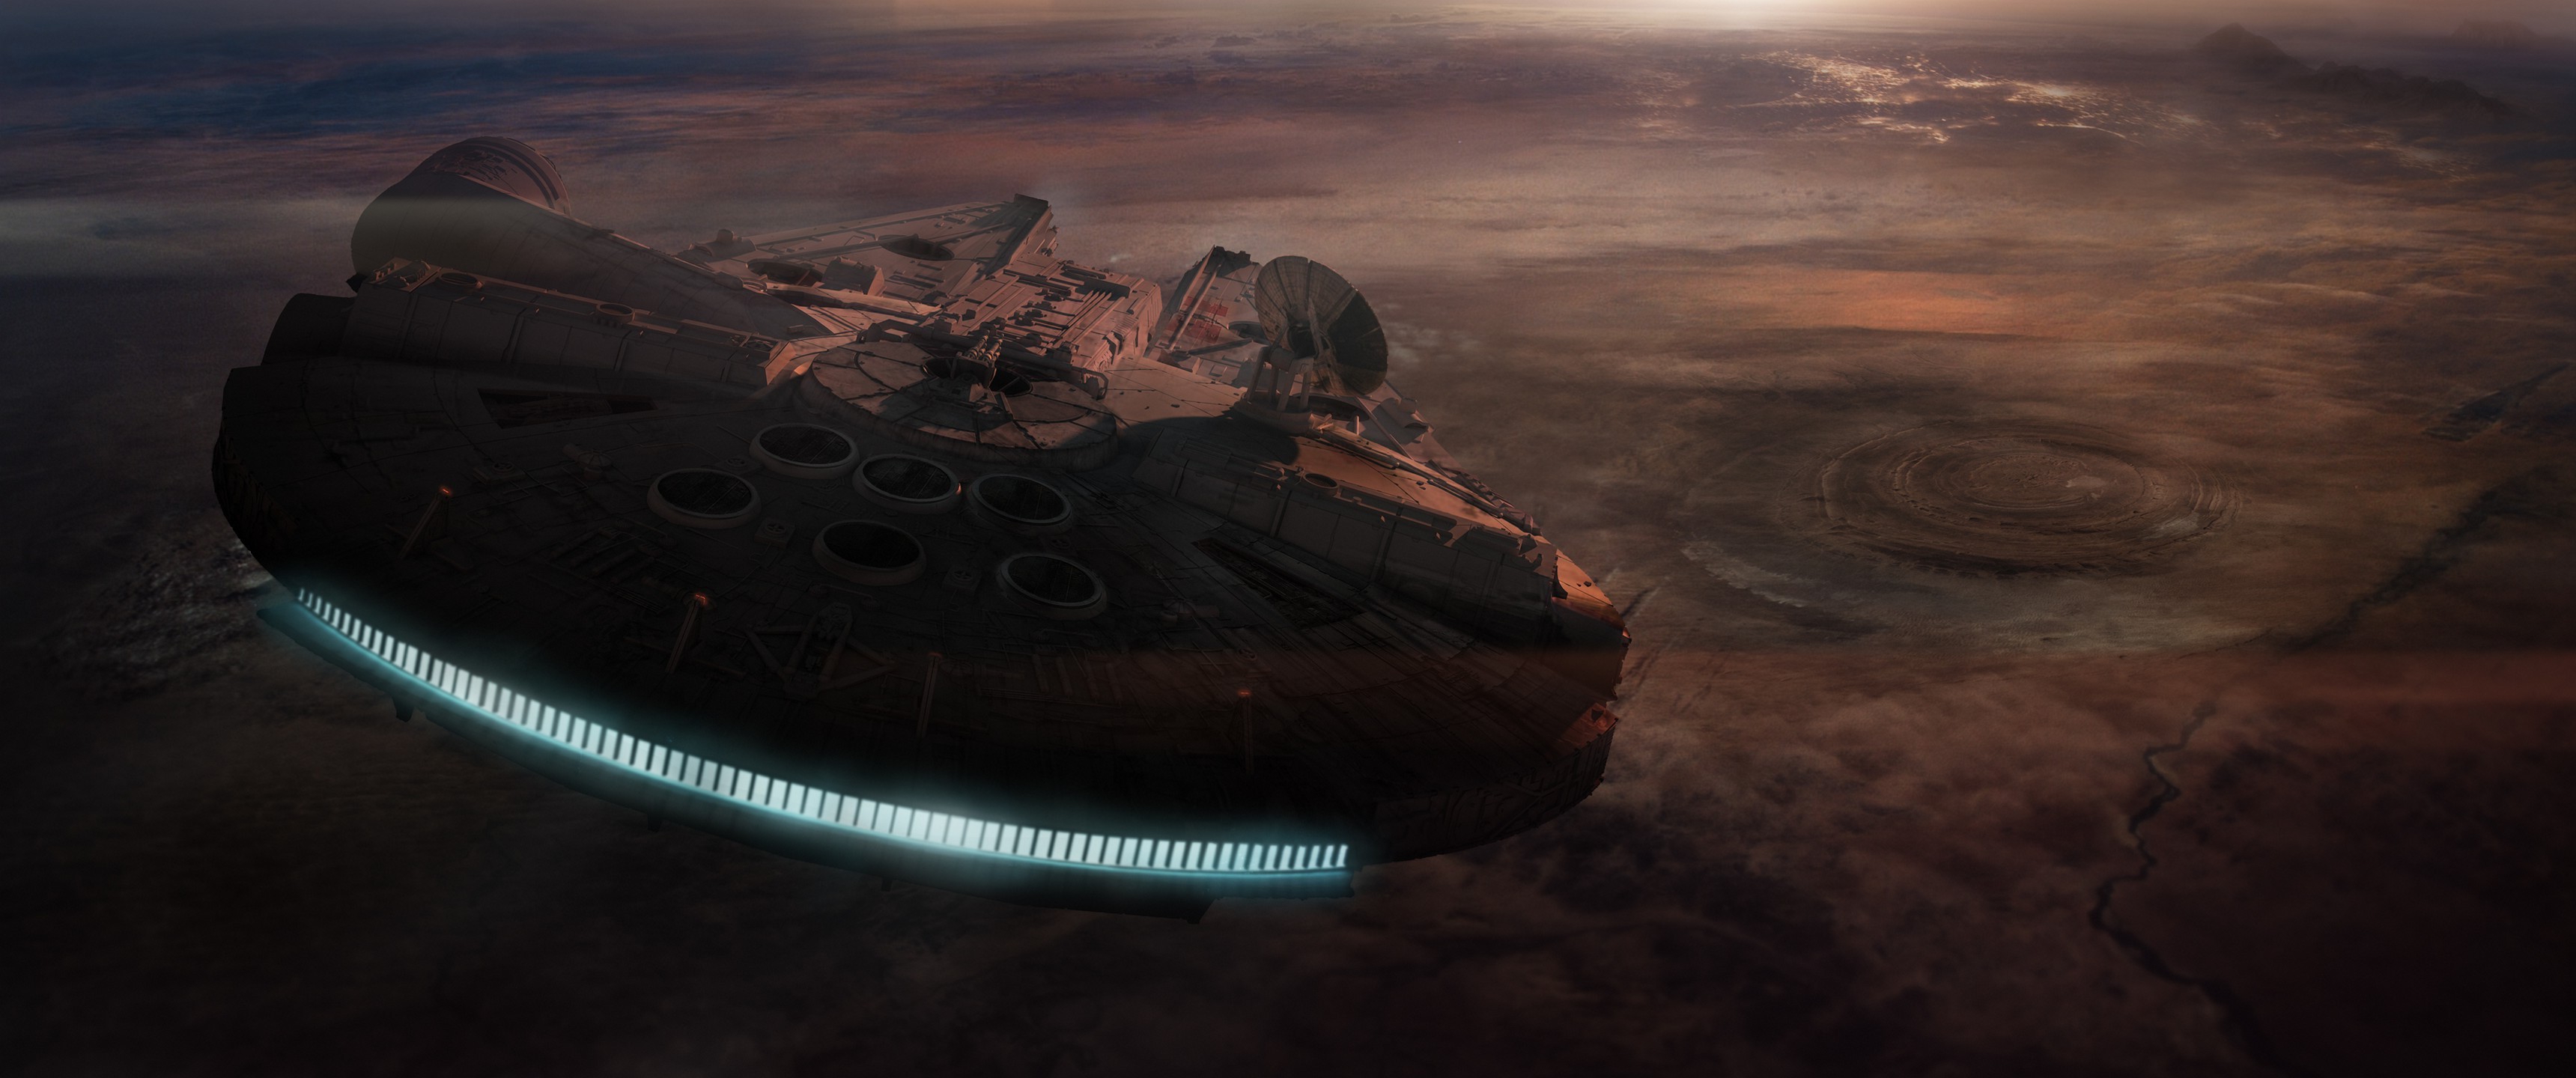 Star Wars, Millennium Falcon Wallpapers HD / Desktop and Mobile